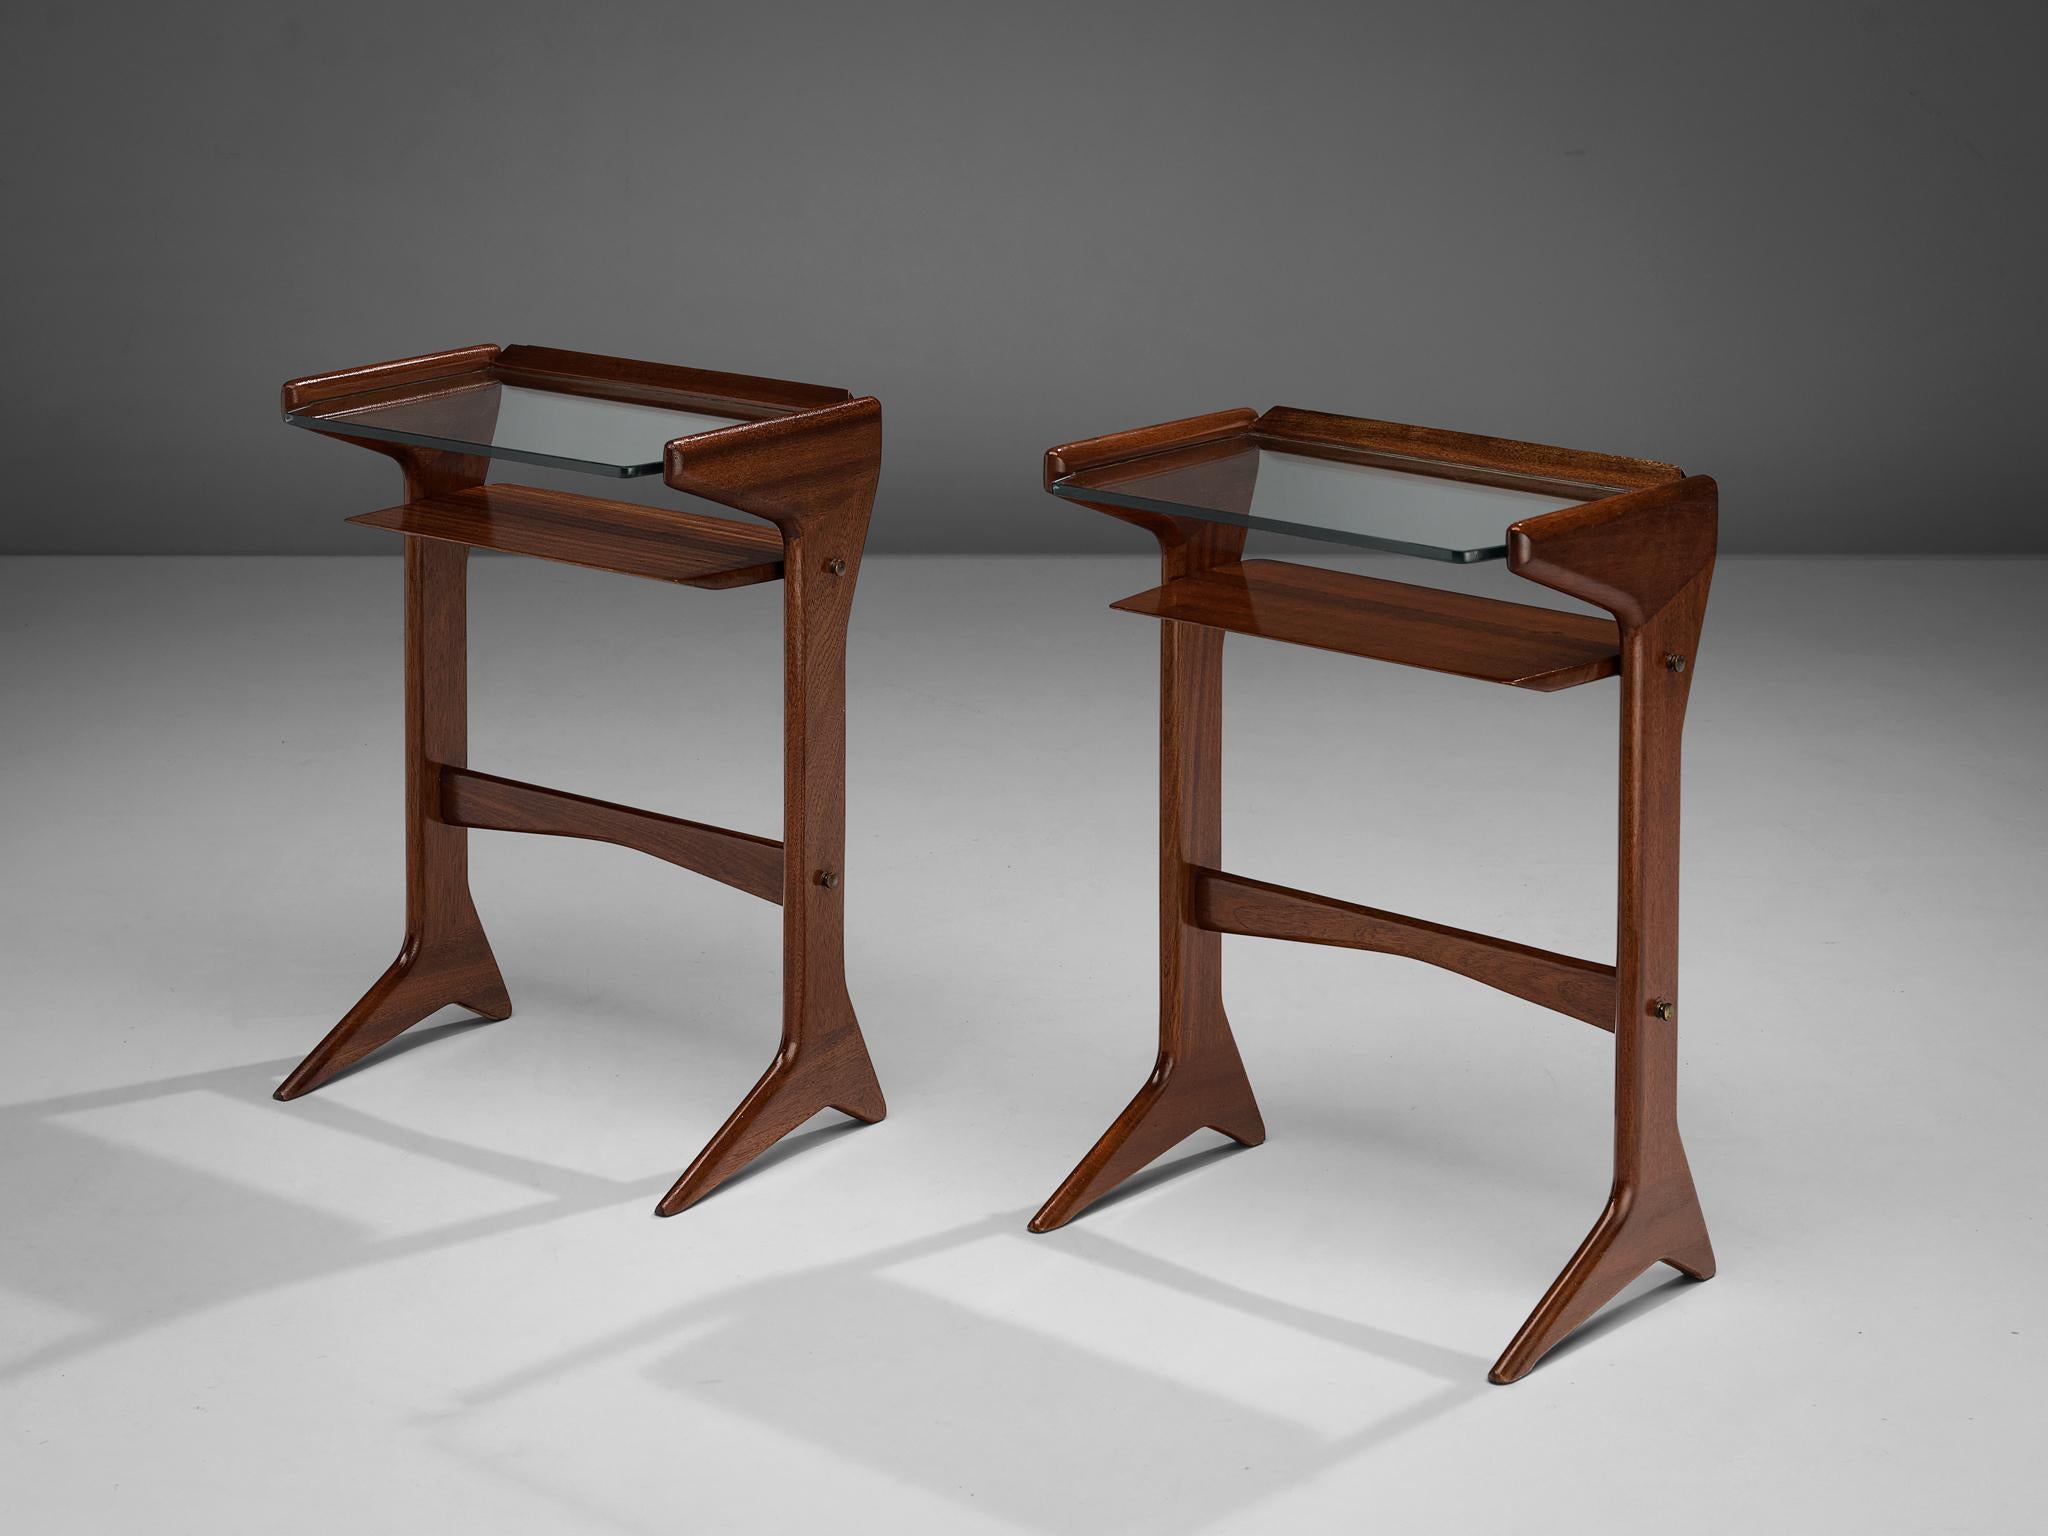 Ico Parisi for Angelo de Baggis, pair of side tables or night stands, model ‘360’, mahogany, glass, brass, Italy, designed in 1954

Ico Parisi designed the side tables model ‘360’ originally as telephone stands. He imagined the design to be